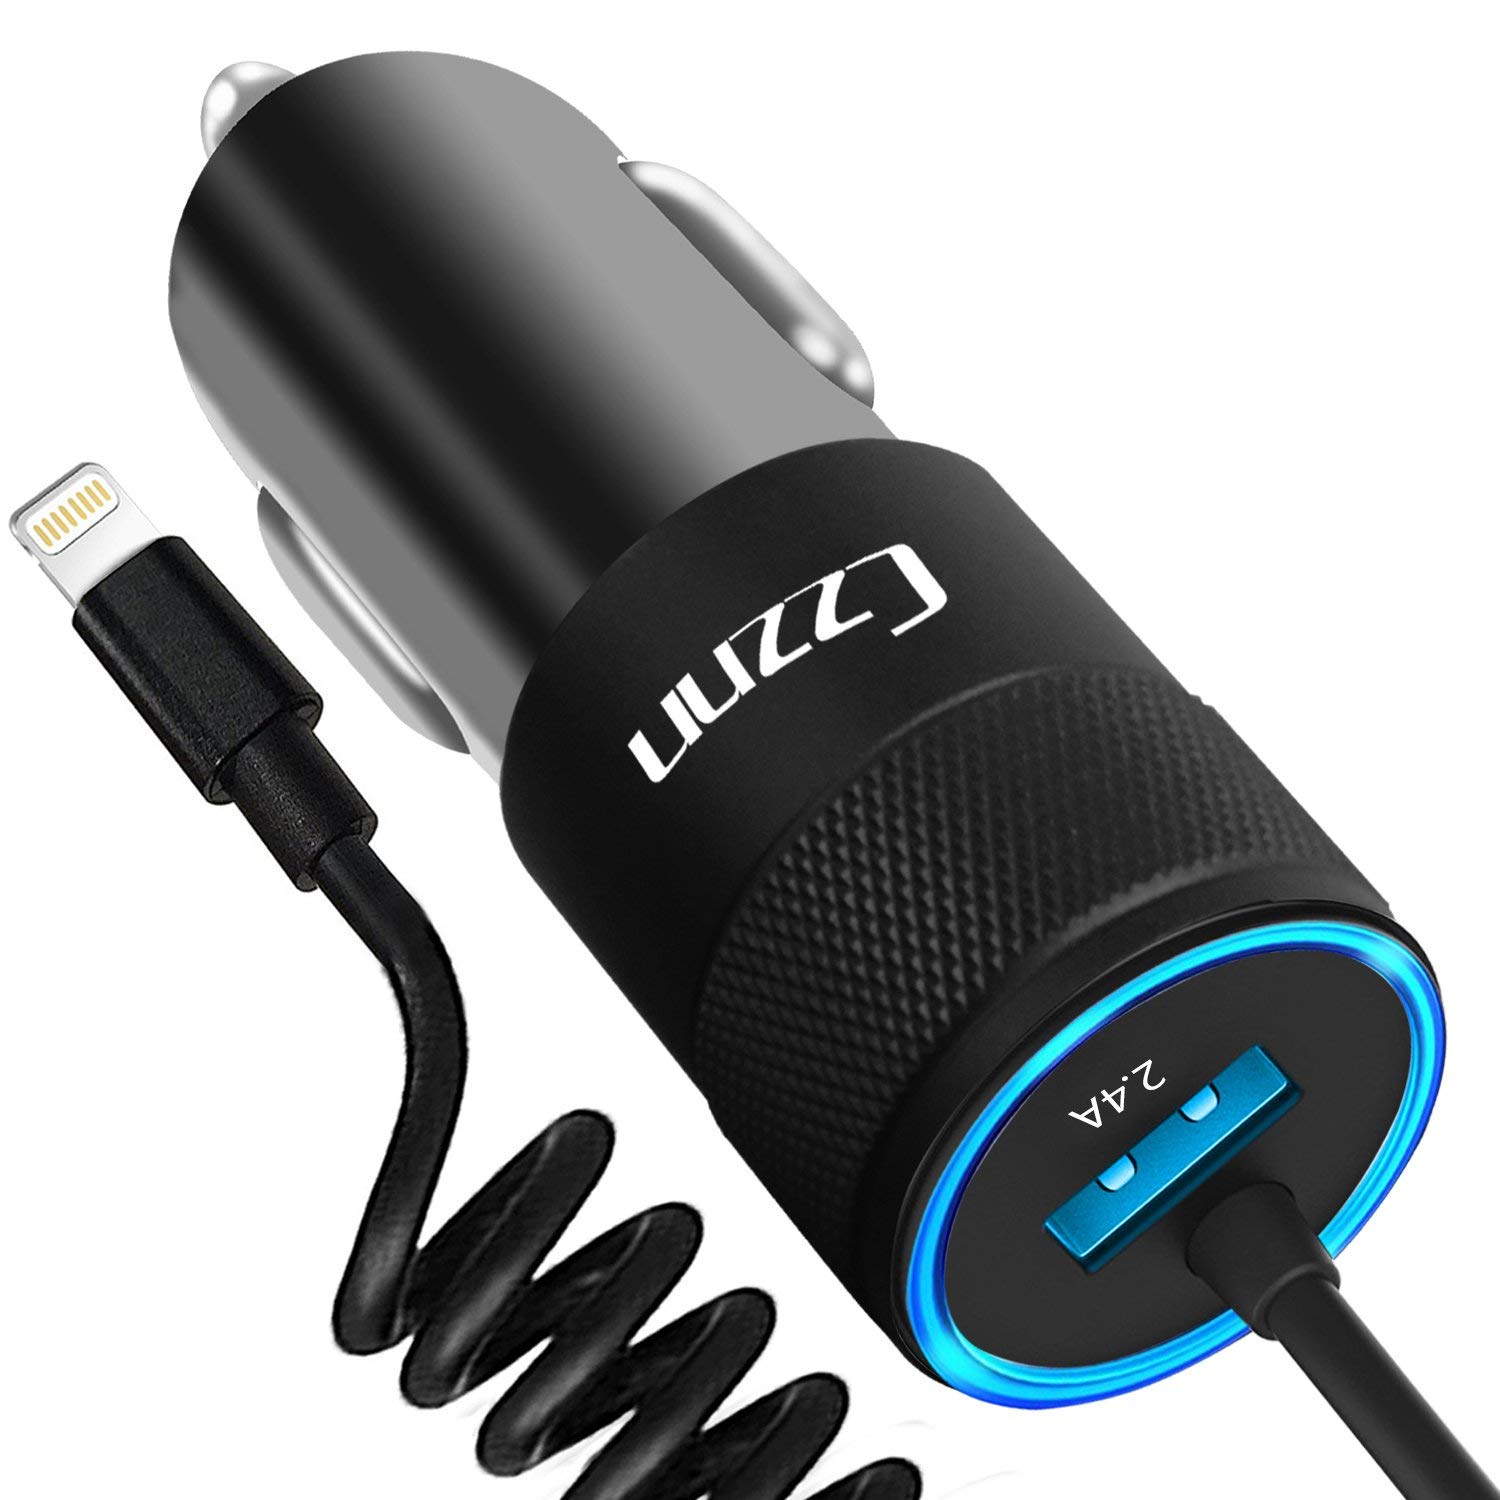 5 Ways Car Charger Installation Points Can Make Travel More Enjoyable